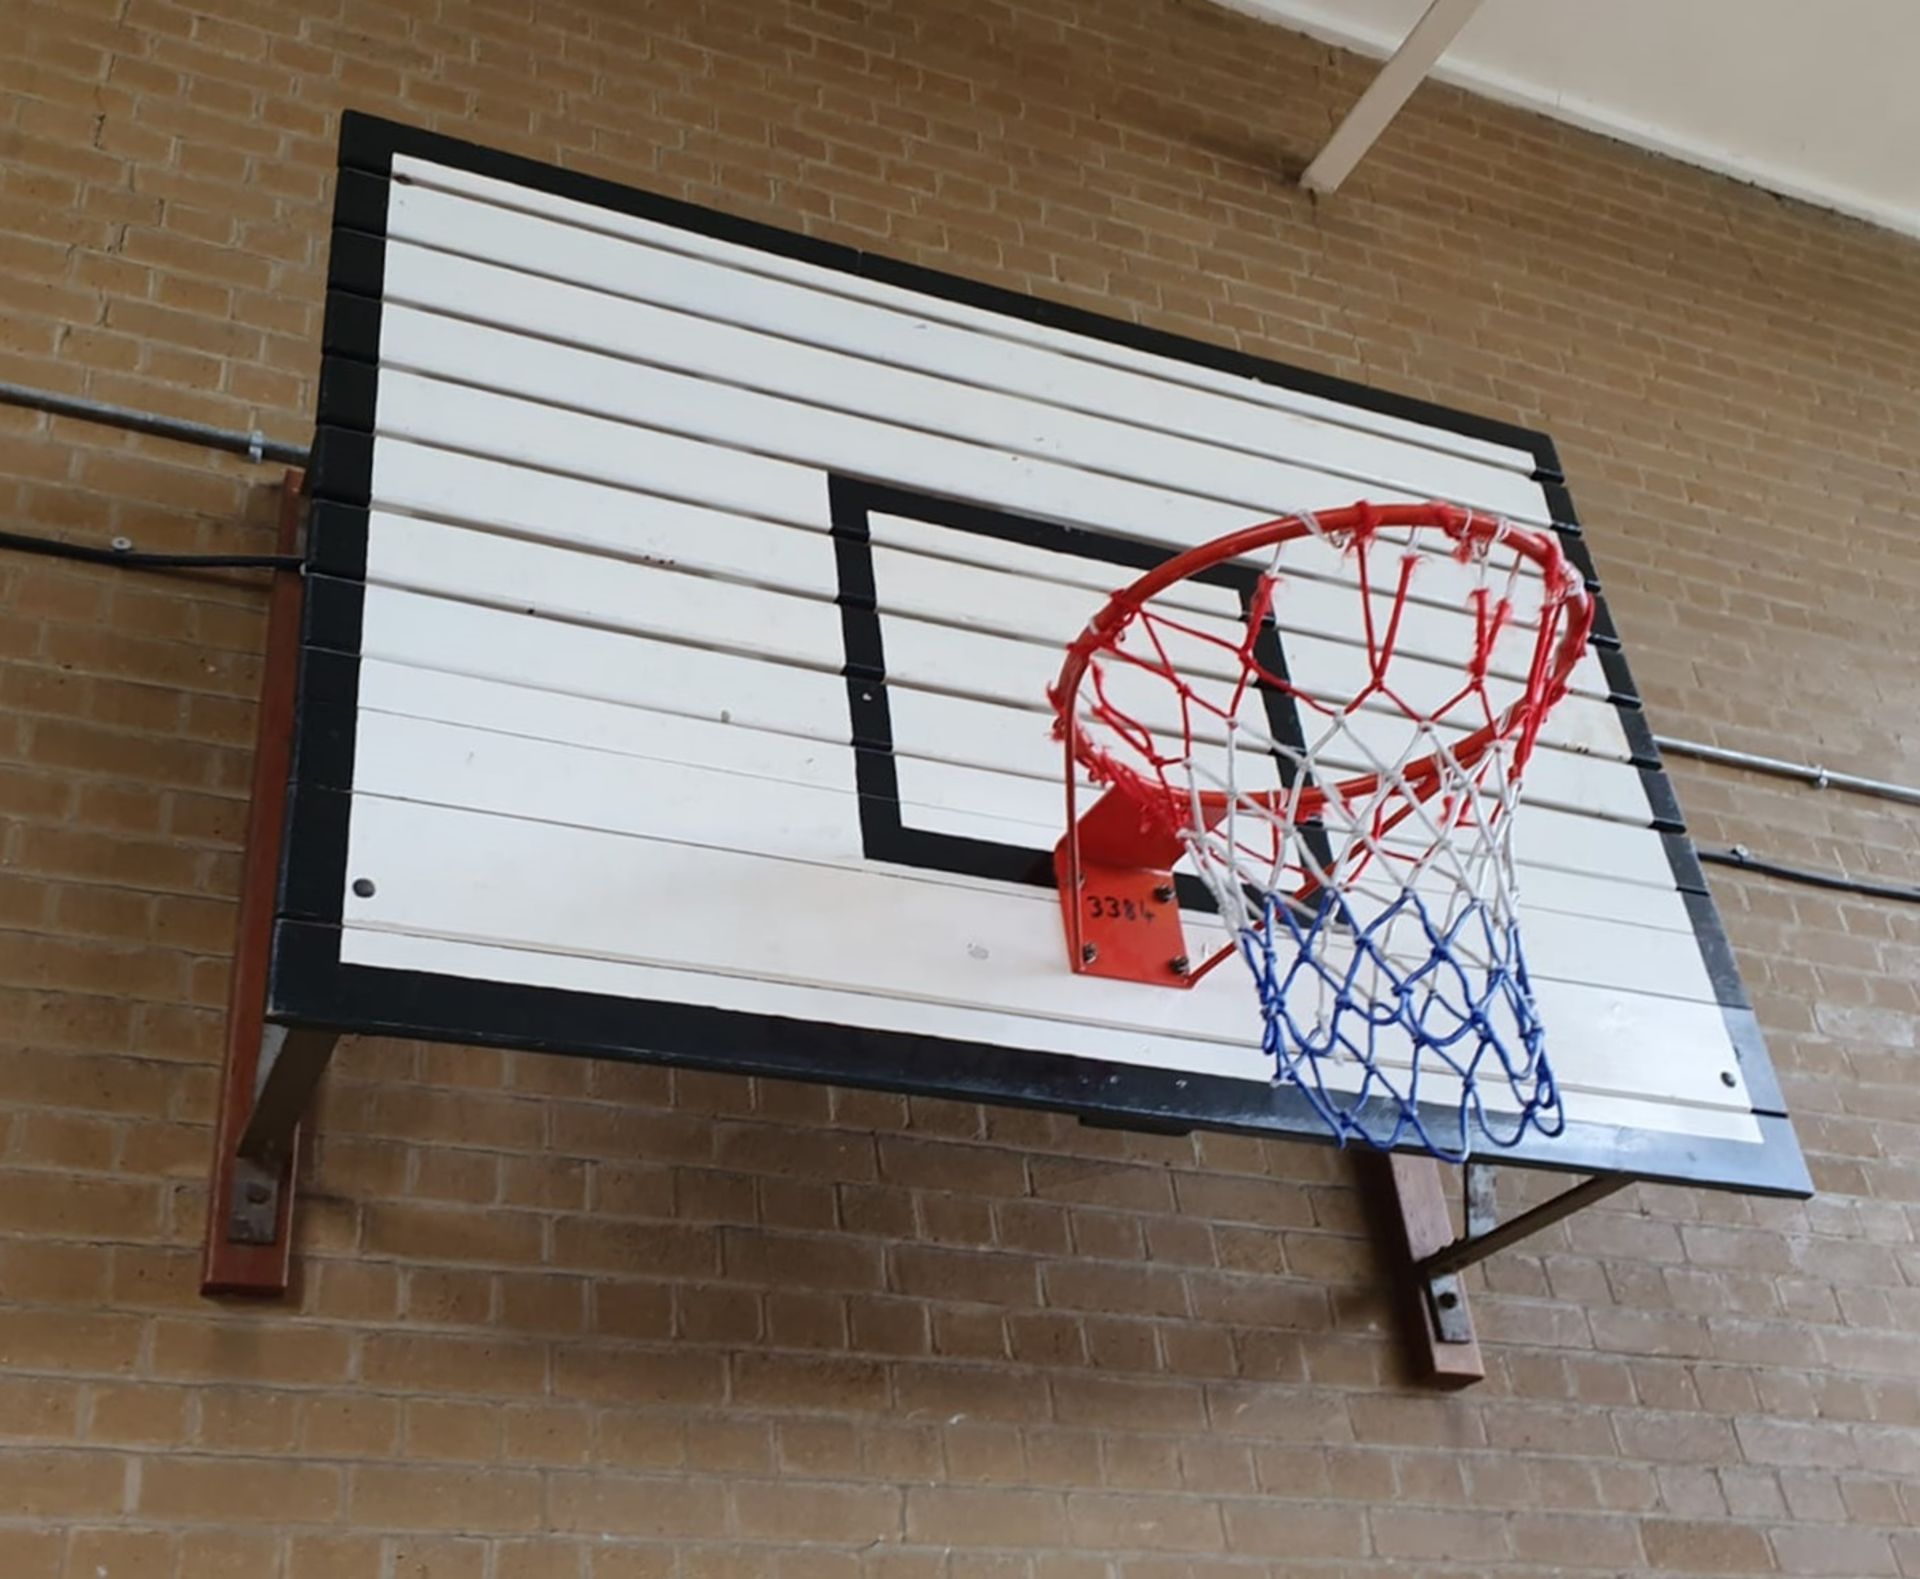 2 x Wall Mounted Basketball Backboards With Nets - Pair of - To Be Removed From Educational Sports